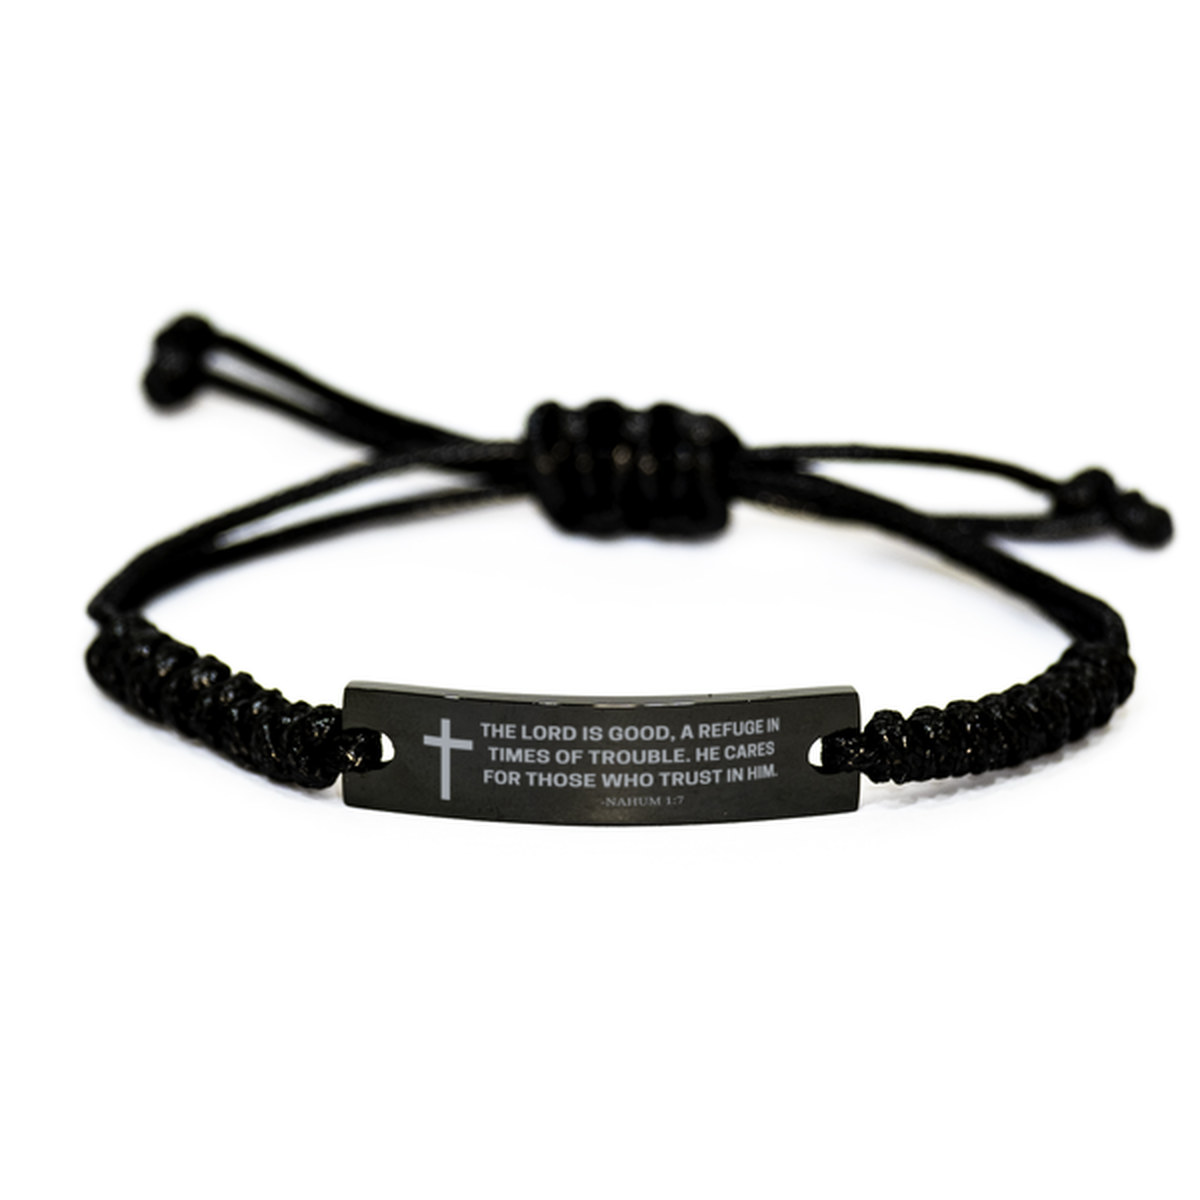 Baptism Gifts For Teenage Boys Girls, Christian Bible Verse Black Rope Bracelet, The Lord is good, Catholic Confirmation Gifts for Son, Godson, Grandson, Nephew